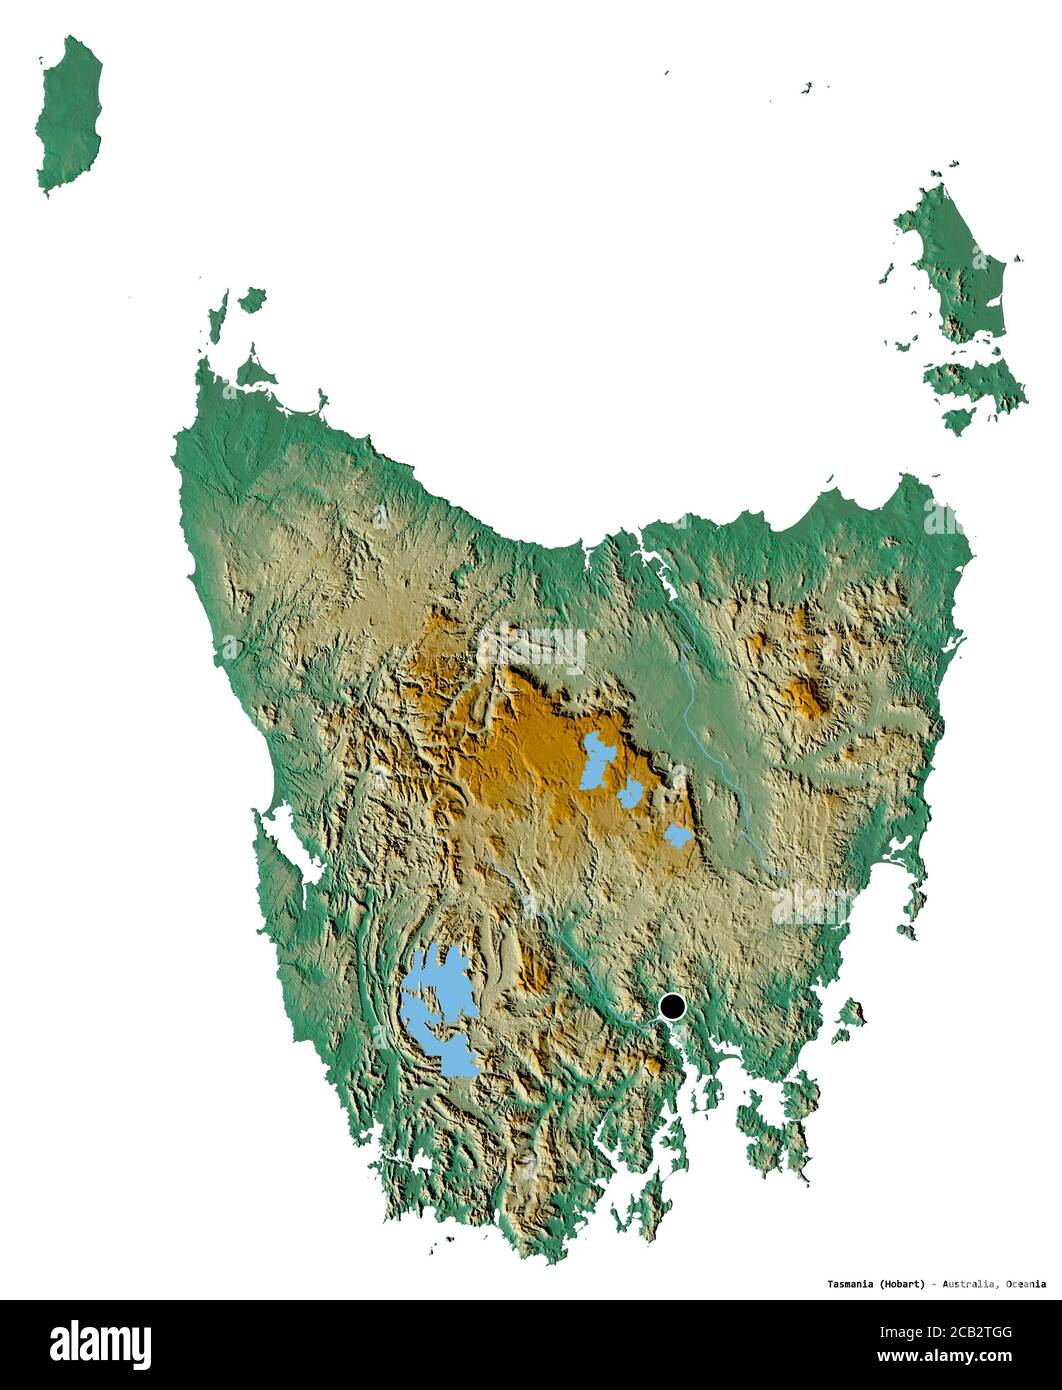 Shape of Tasmania, state of Australia, with its capital isolated on white background. Topographic relief map. 3D rendering Stock Photo